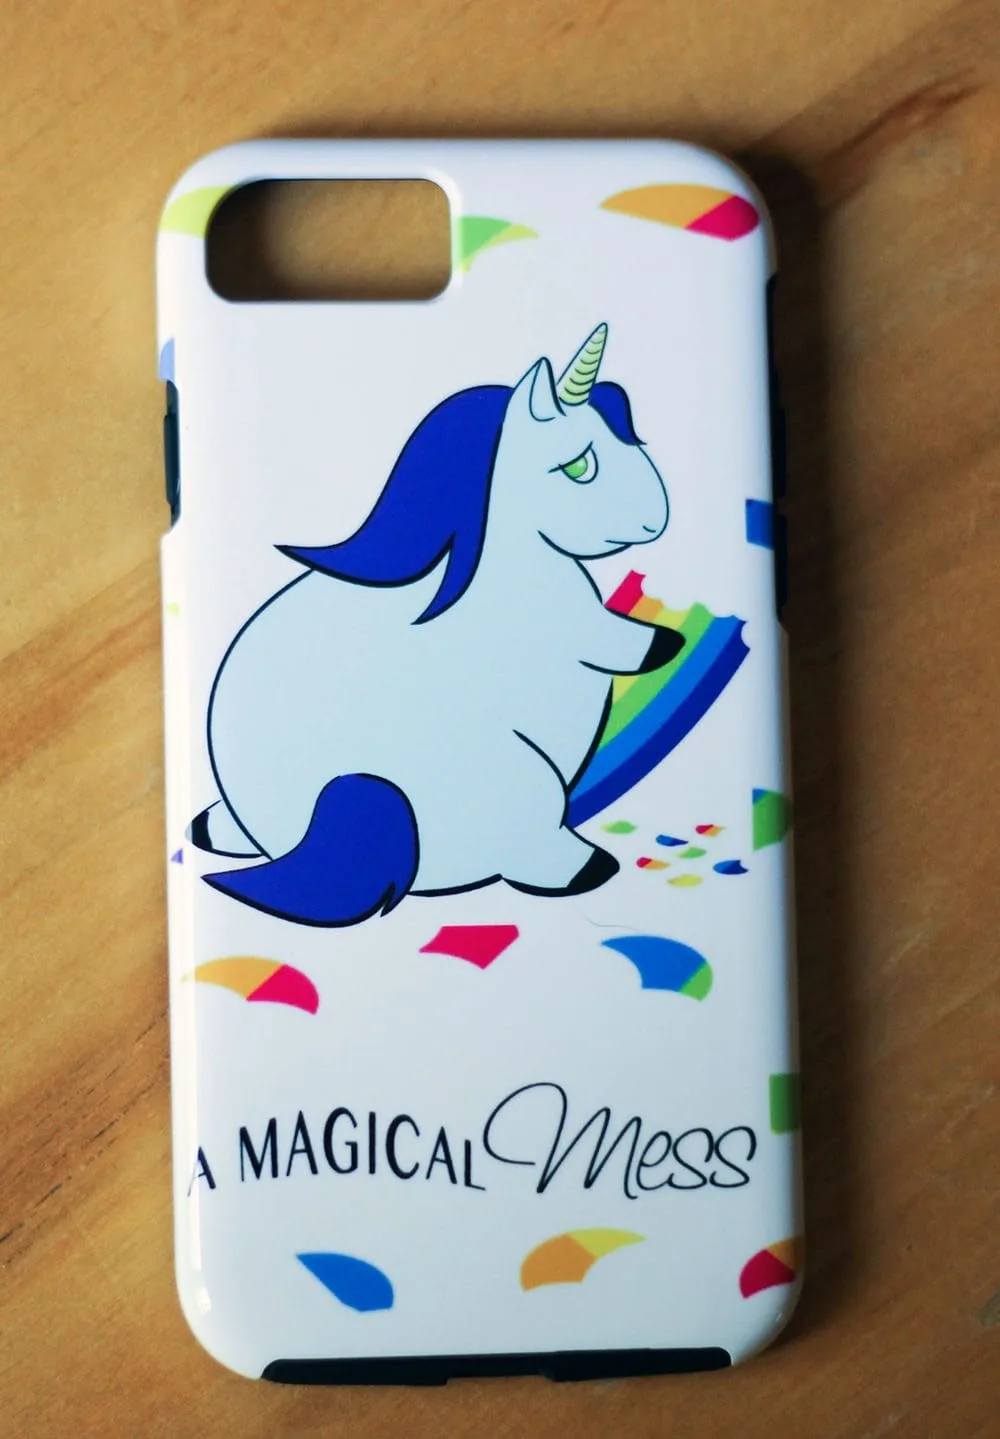 Custom iPhone case with our blog logo